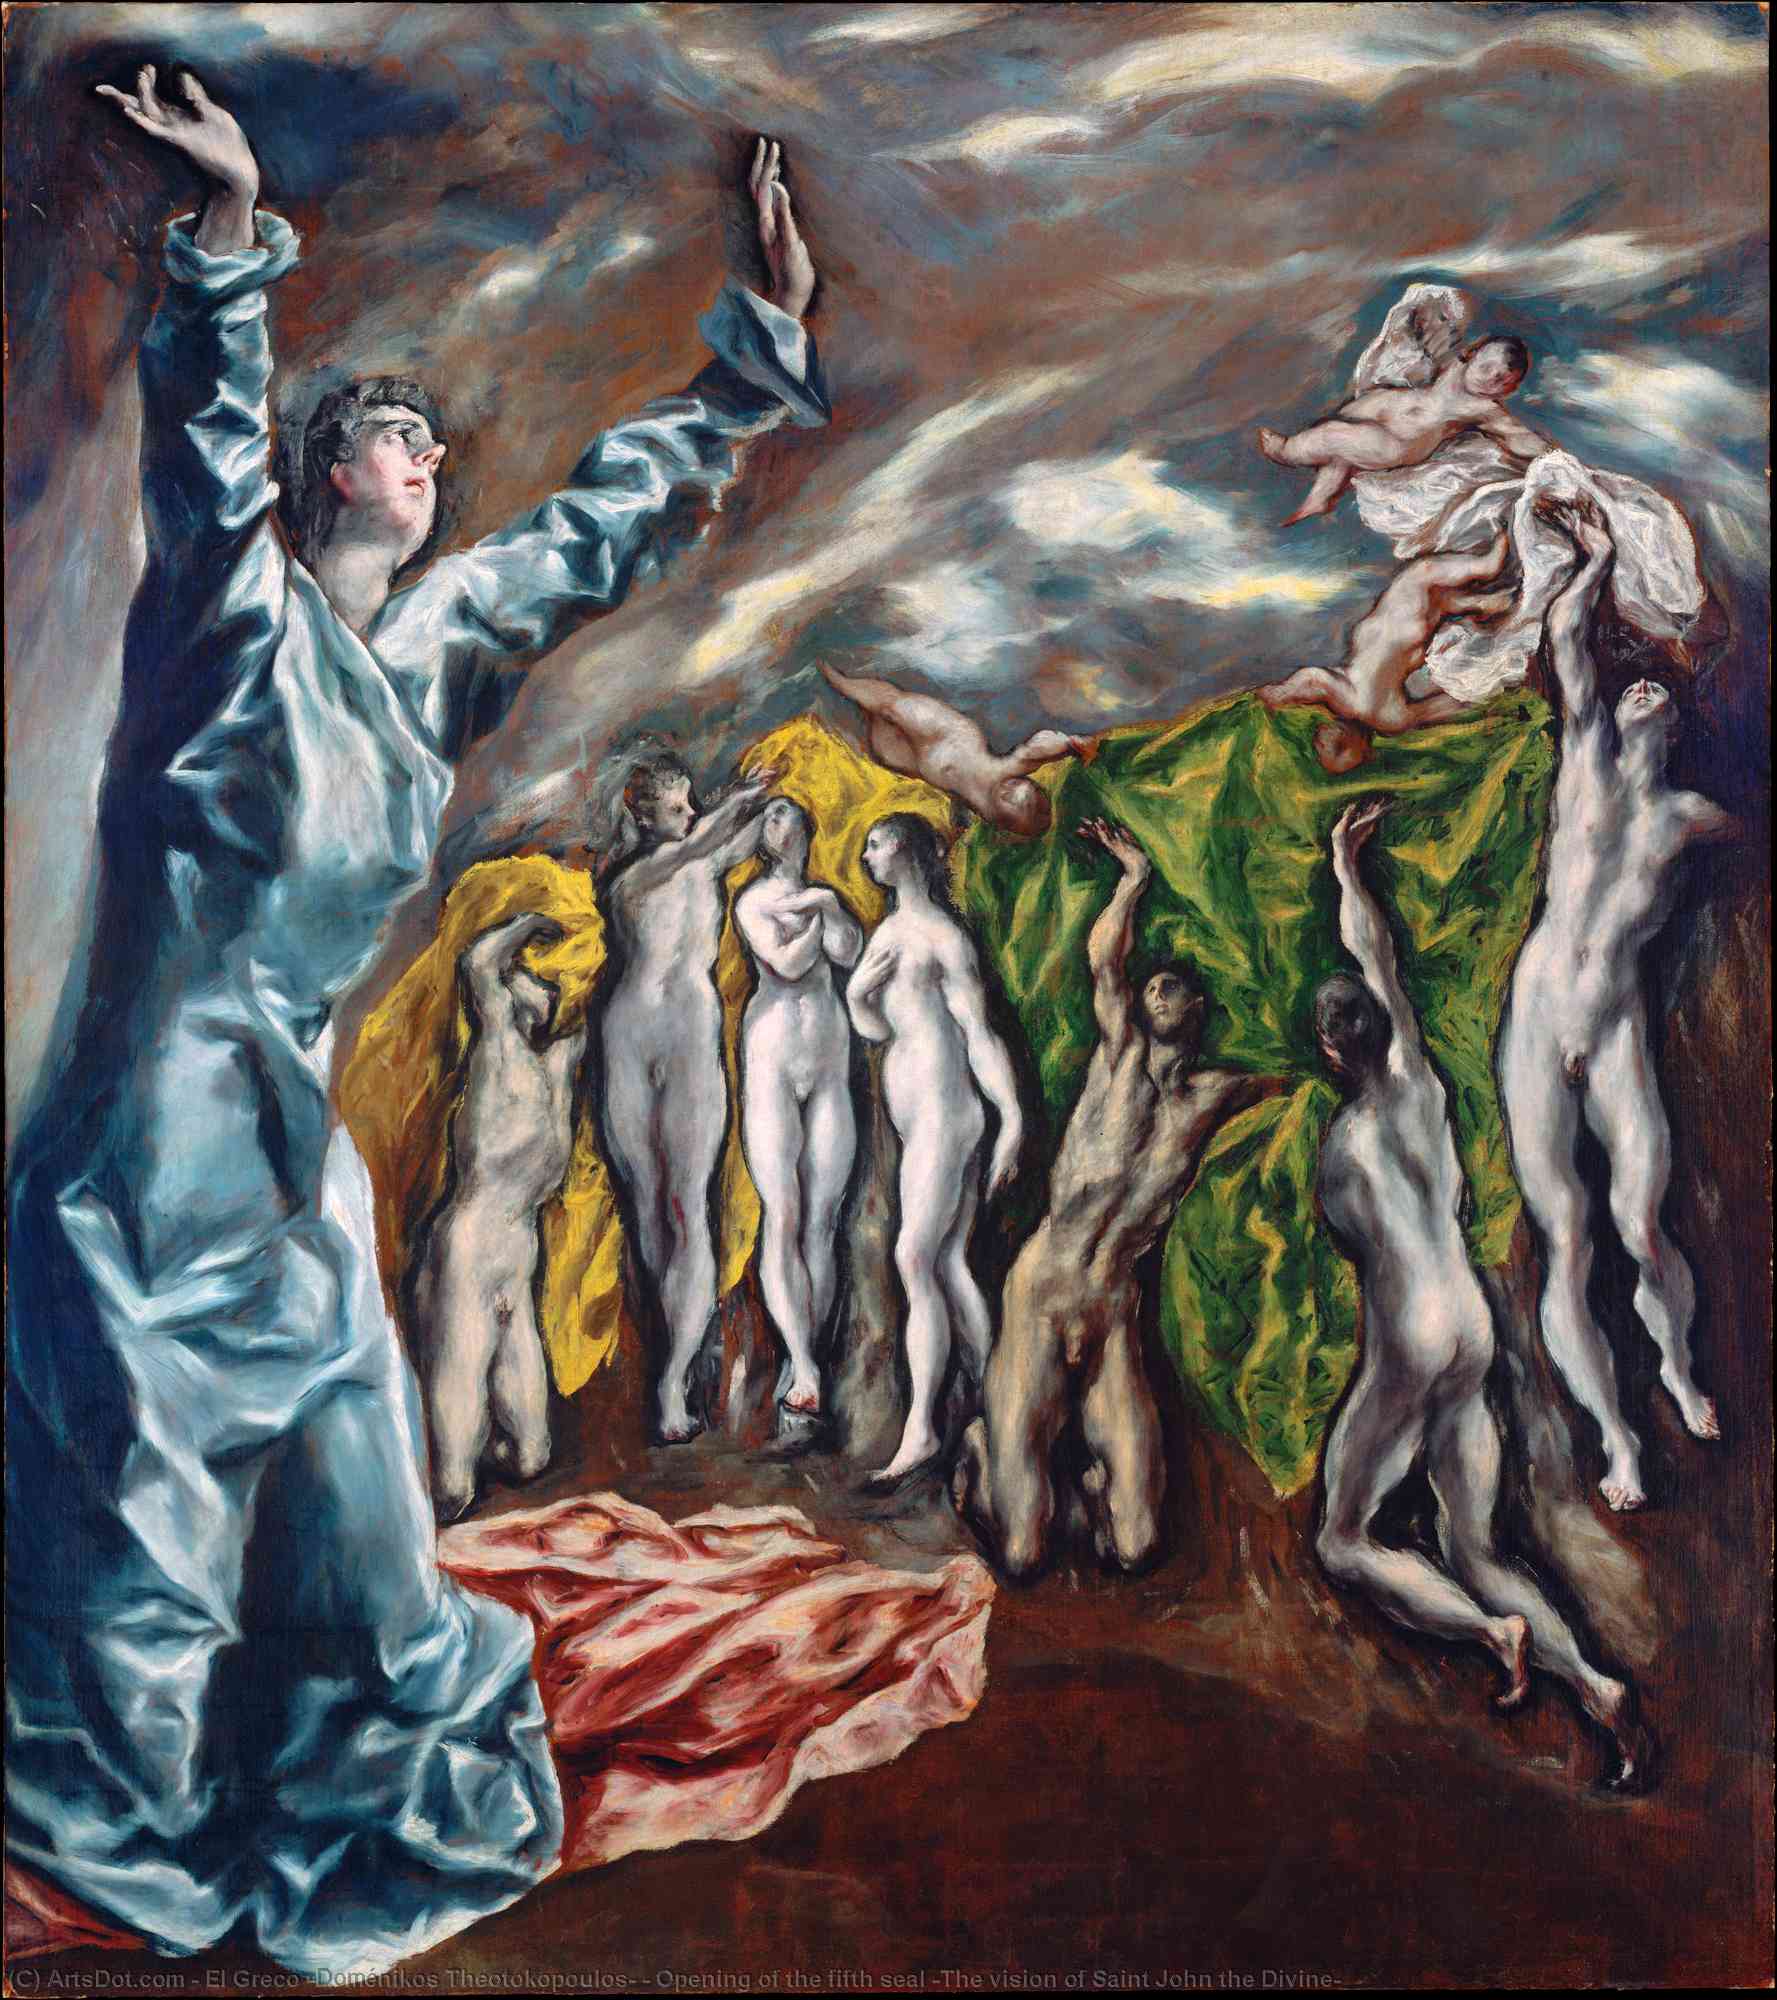 WikiOO.org - Encyclopedia of Fine Arts - Malba, Artwork El Greco (Doménikos Theotokopoulos) - Opening of the fifth seal (The vision of Saint John the Divine)